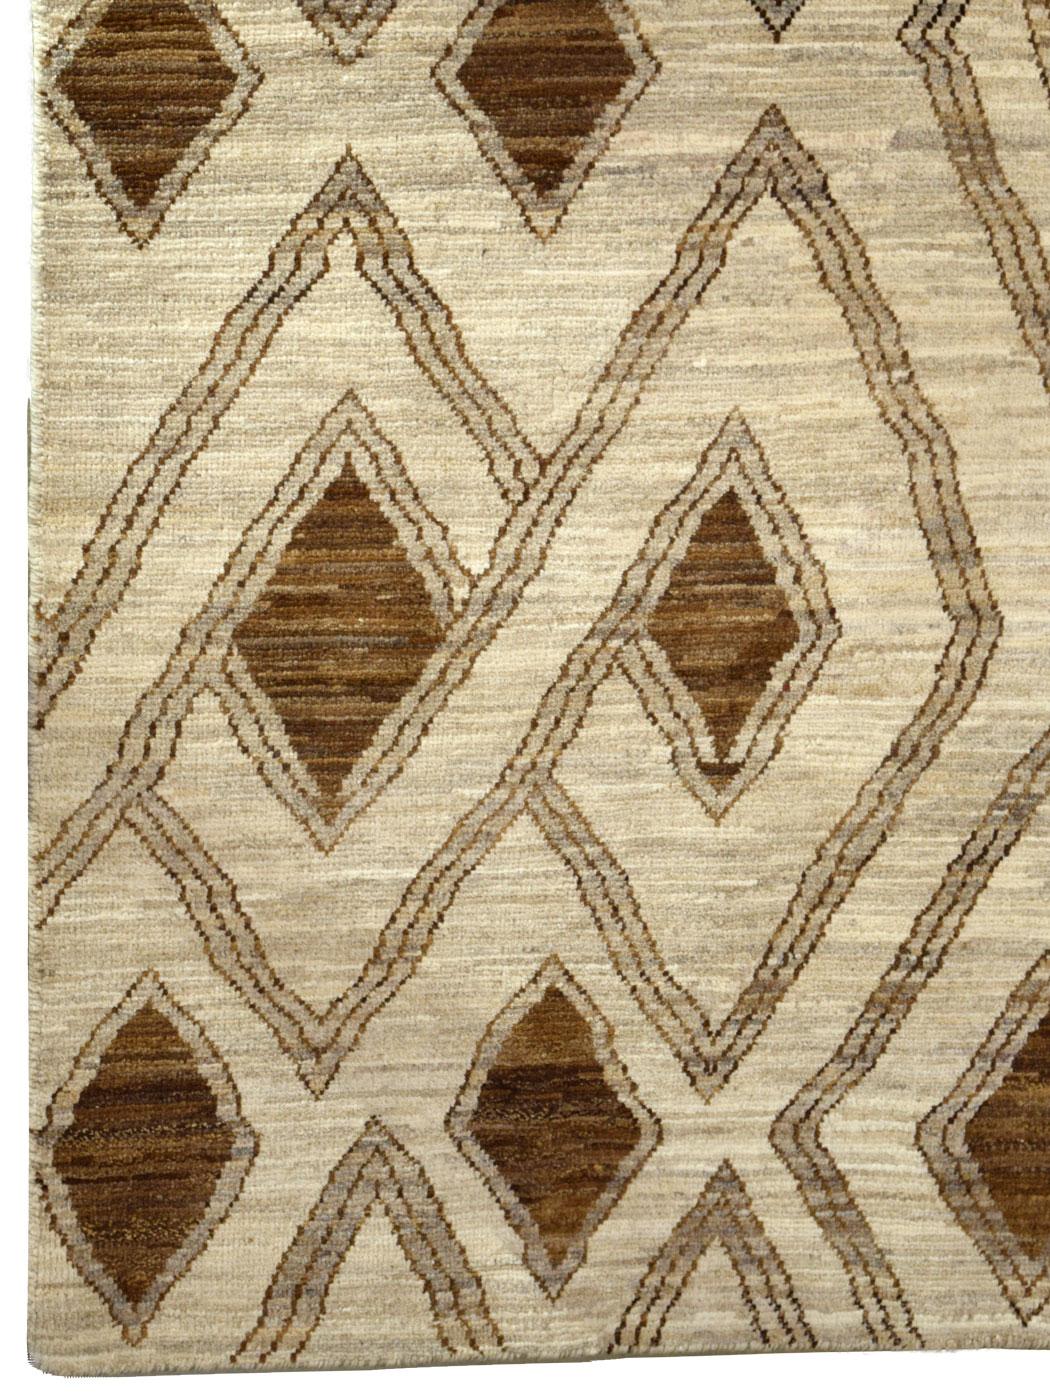 Geometric Neutral Wool Carpet in Brown and Cream In New Condition For Sale In New York, NY